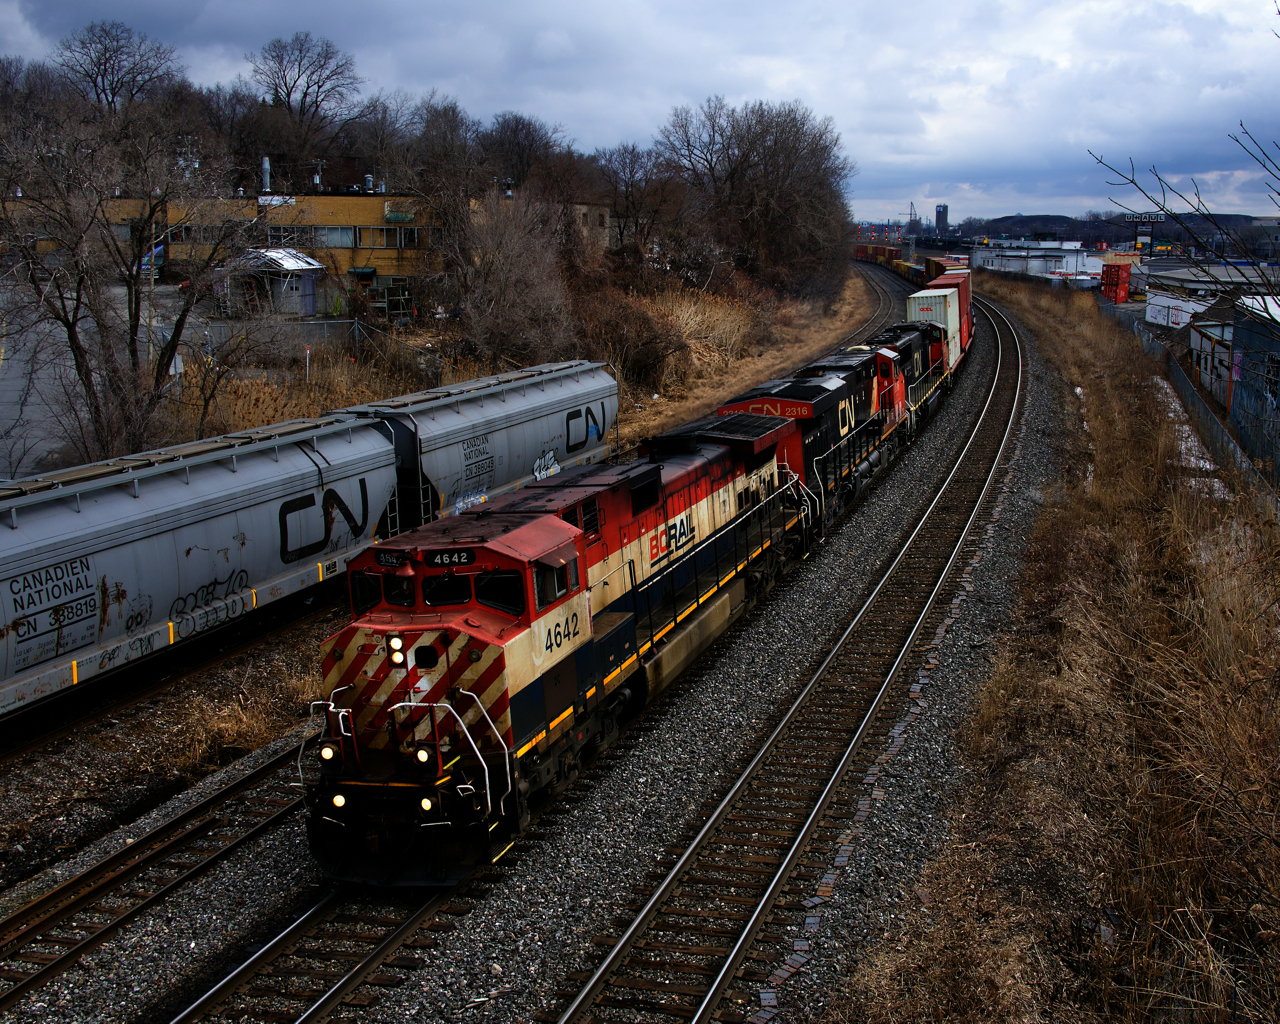 The last red, white and blue Dash9 (BCOL 4642) is leading CN 149 as it passes parked grain cars in Montreal West. Trailing are CN 2316 & CN 5693.